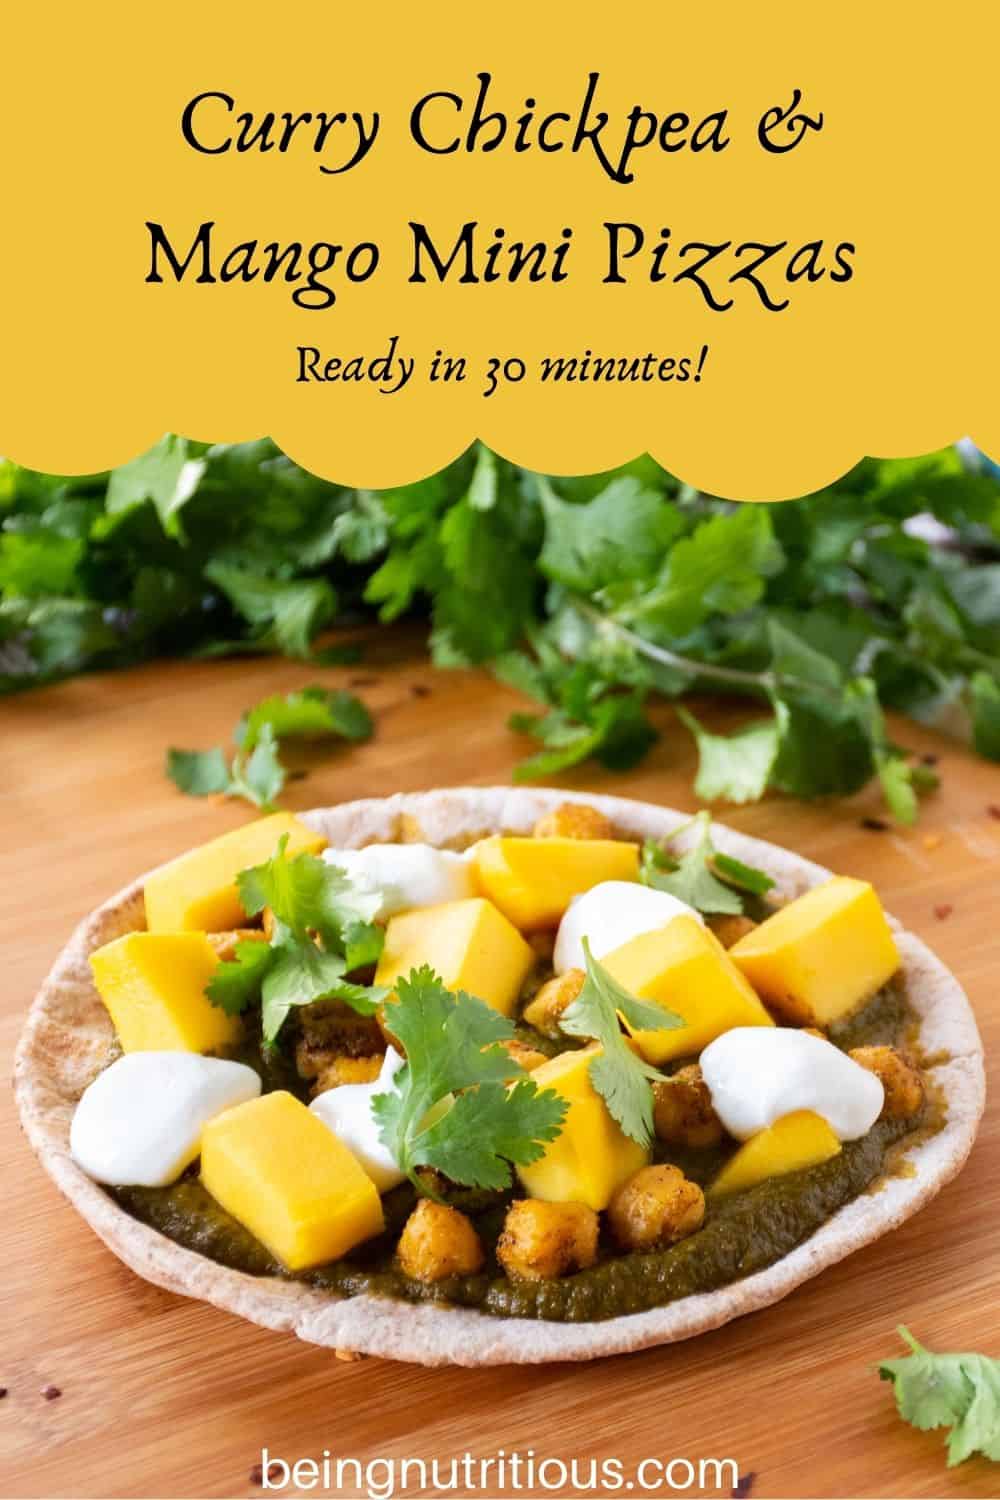 pizza with spinach sauce, chickpeas, and mangoes on a mini pita. Text overlay: Curry Chickpea & mango mini pizzas; ready in 30 minutes!